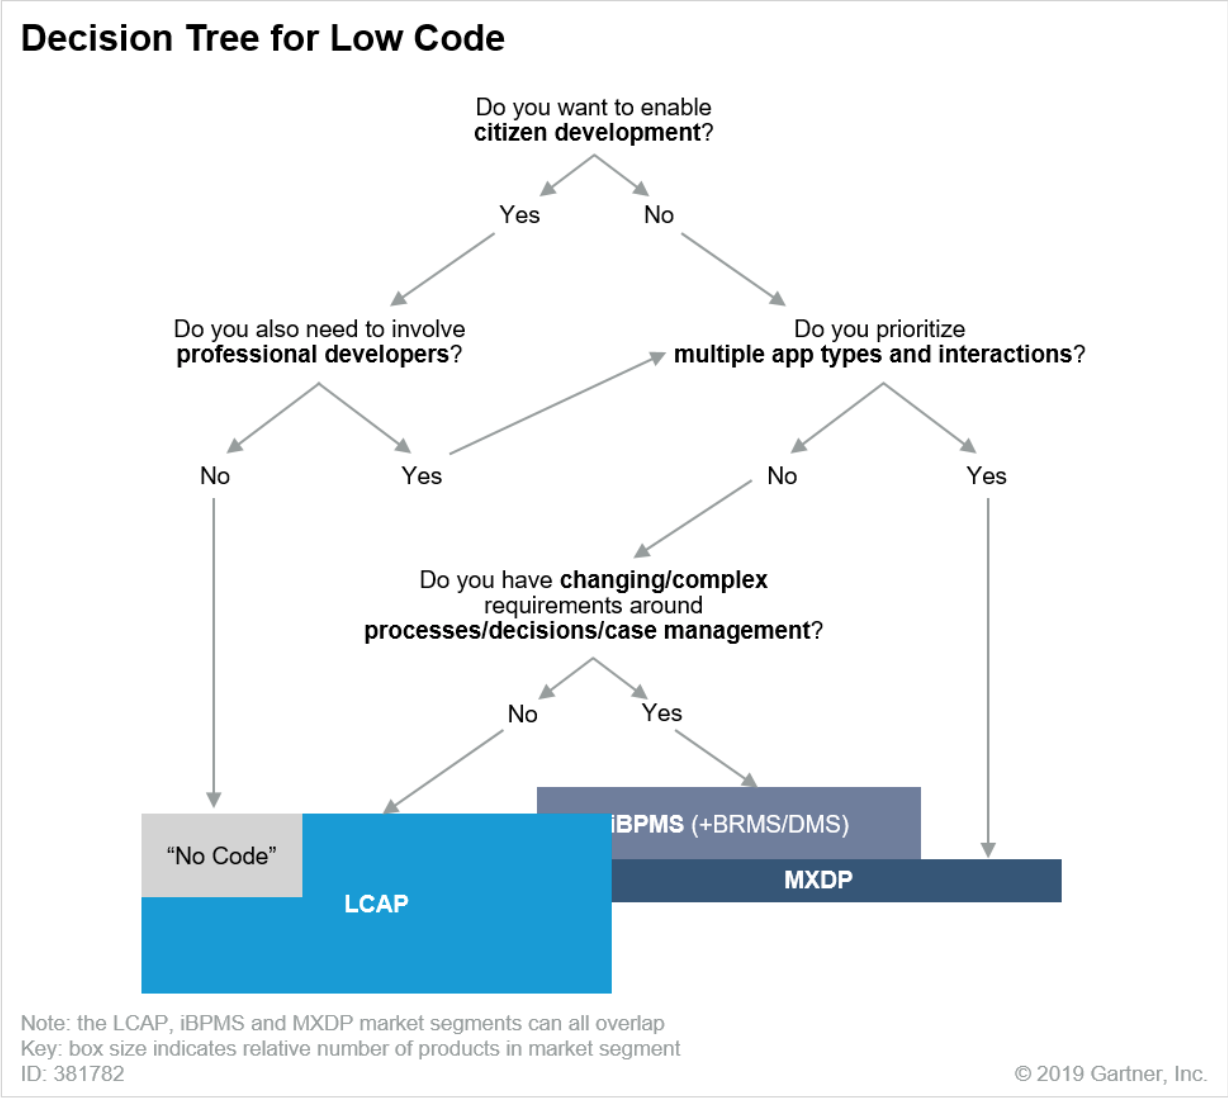 Decision tree showing the trade offs between different low code development platforms